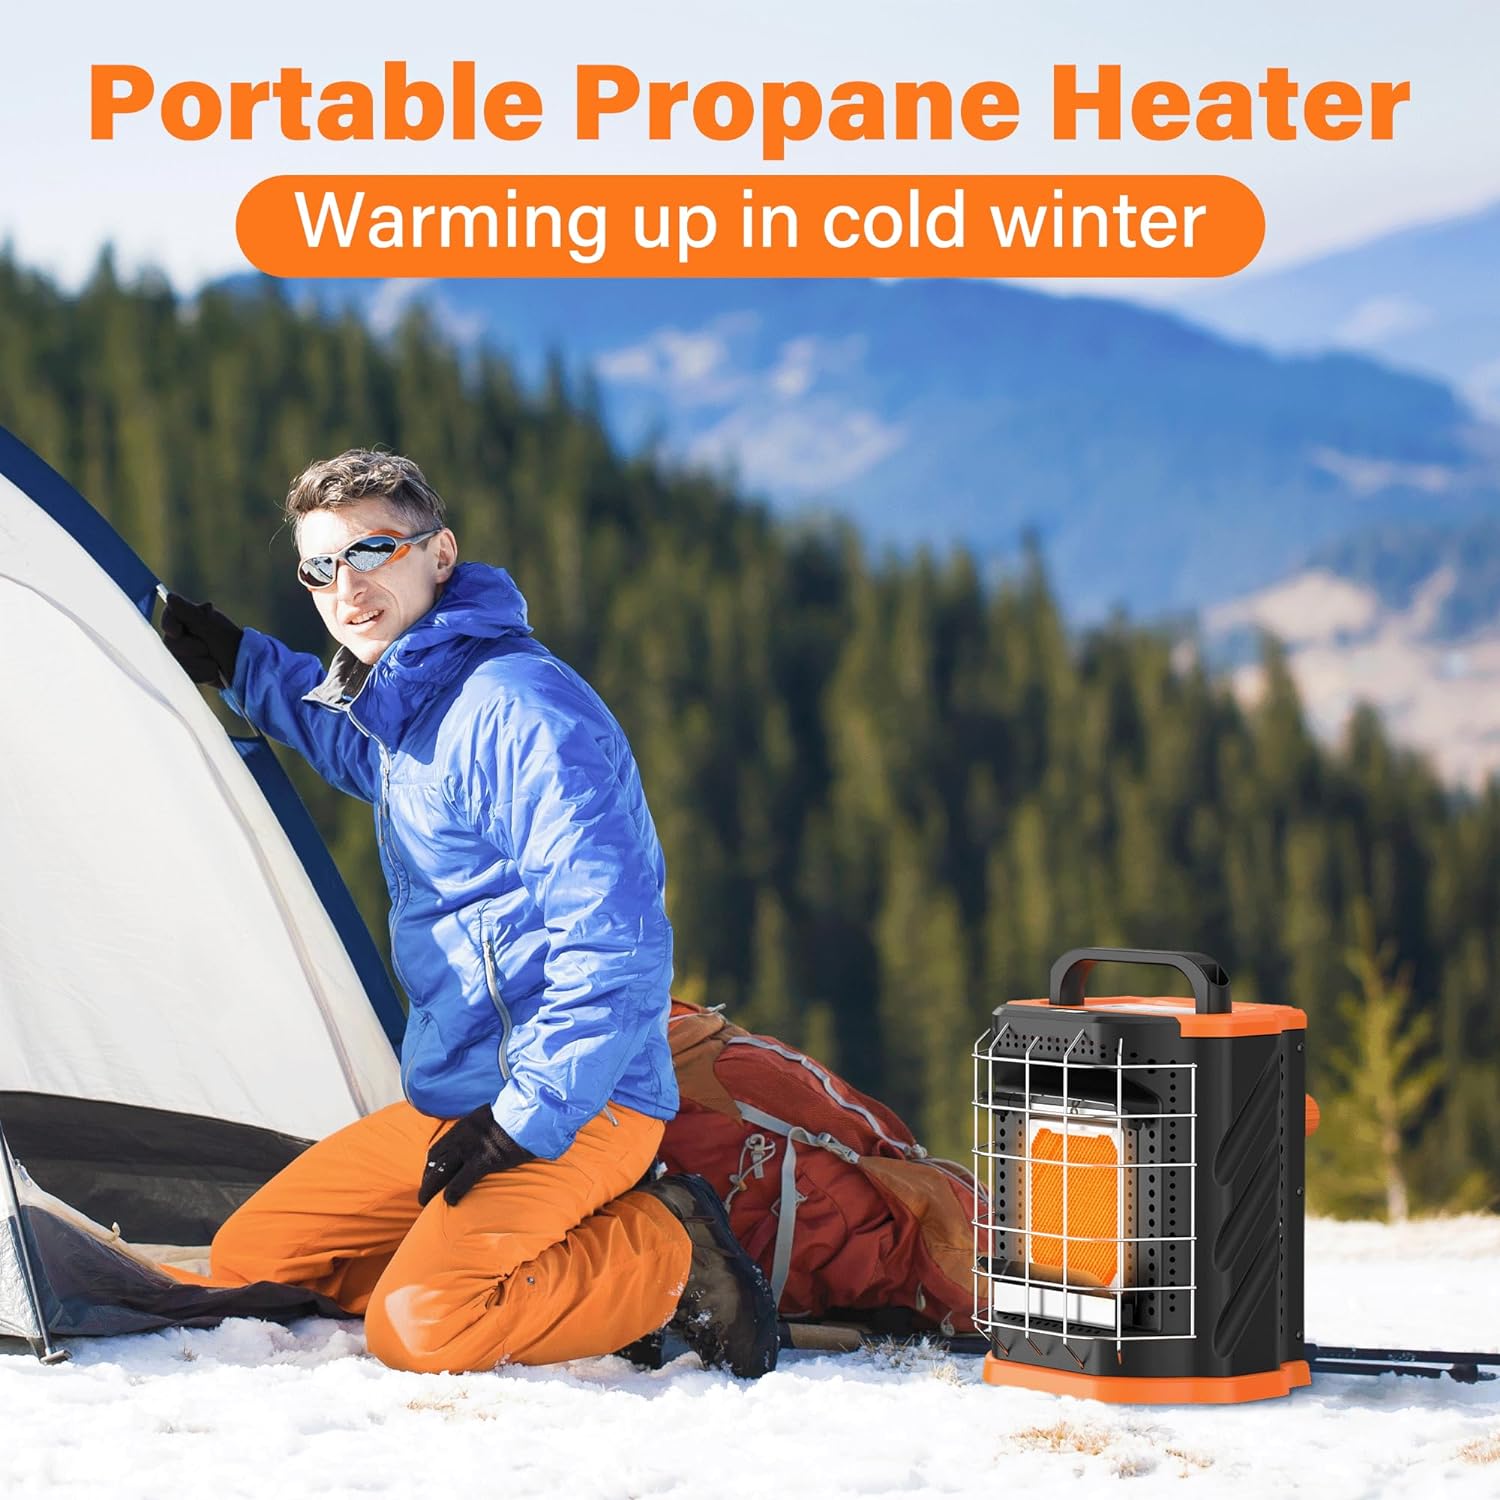 PANERGY Outdoor Heaters for Patio, 7500 BTU Portable Propane Radiant Heater with 2 Heating Modes, Safe Gas Heater with Tip-Over Protection, Tent Heater for Garage, Camping, Ice Fishing, Hunting - PANERGY Outdoor Heaters Review